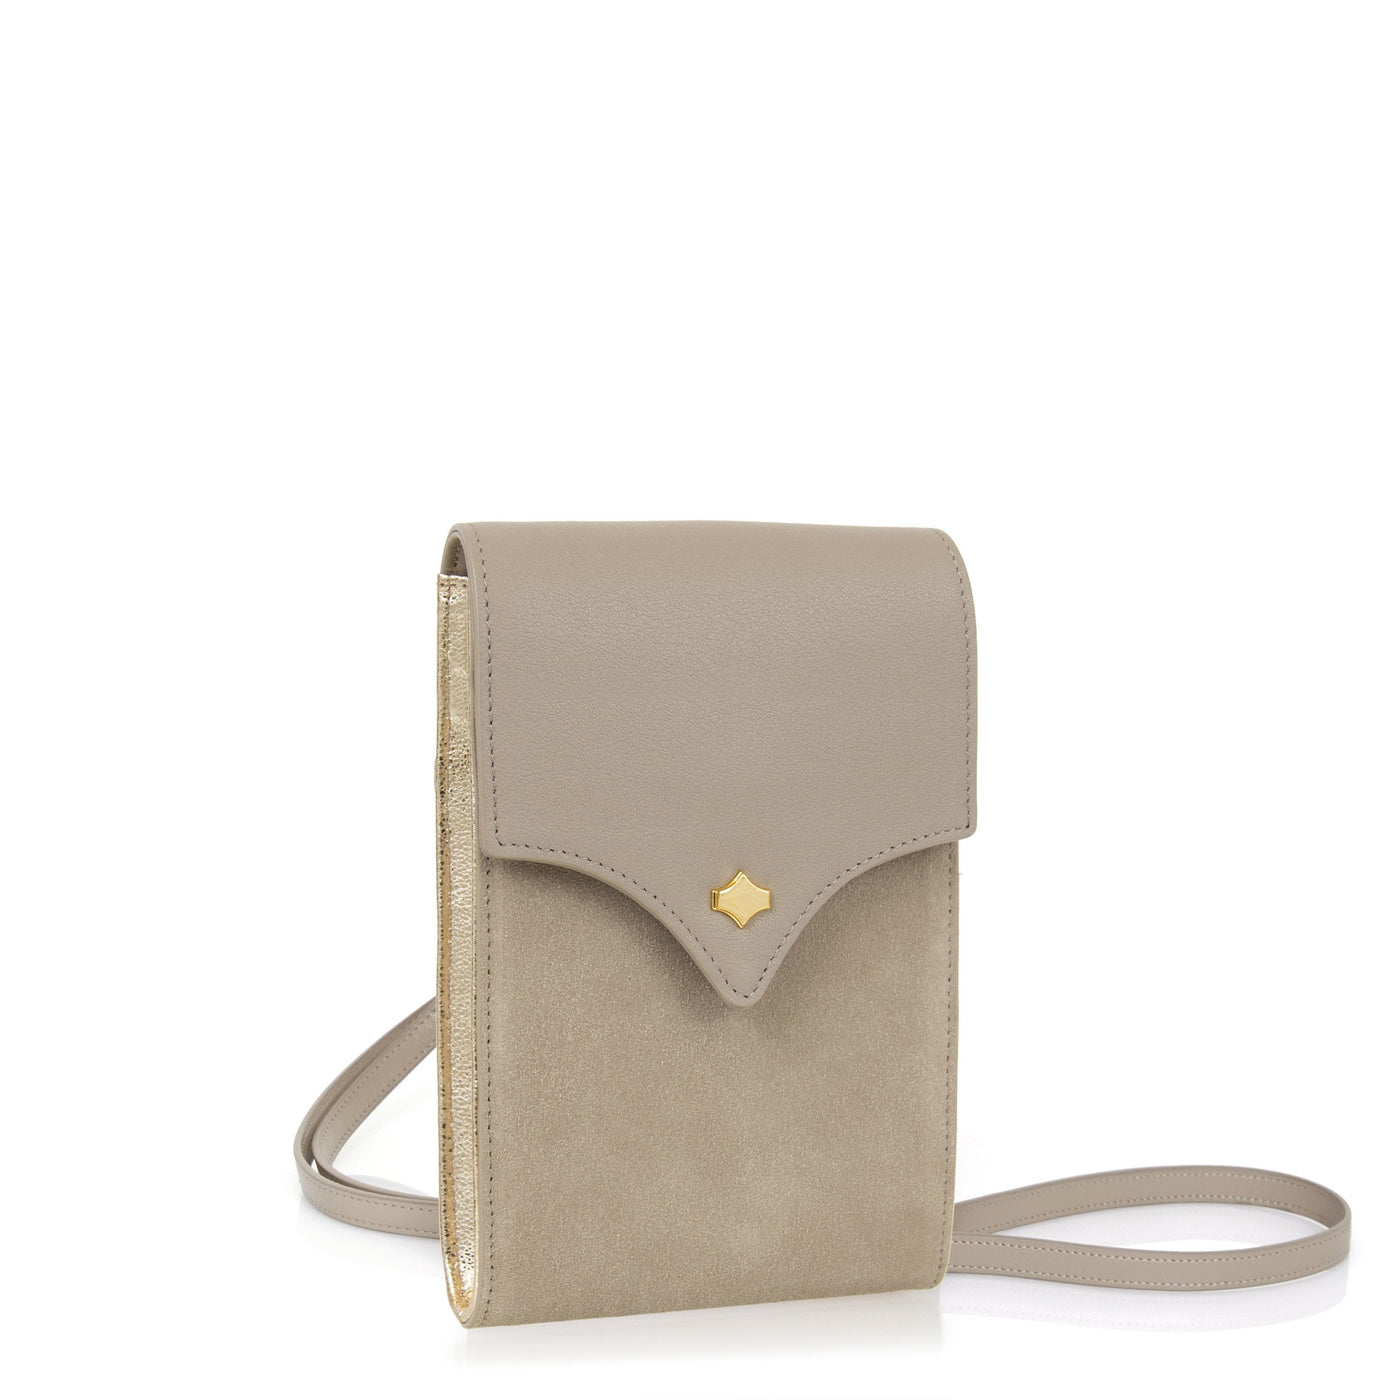 Katie Loxton Signature Taupe Crossbody Bag | KLB2741 – Ganly's